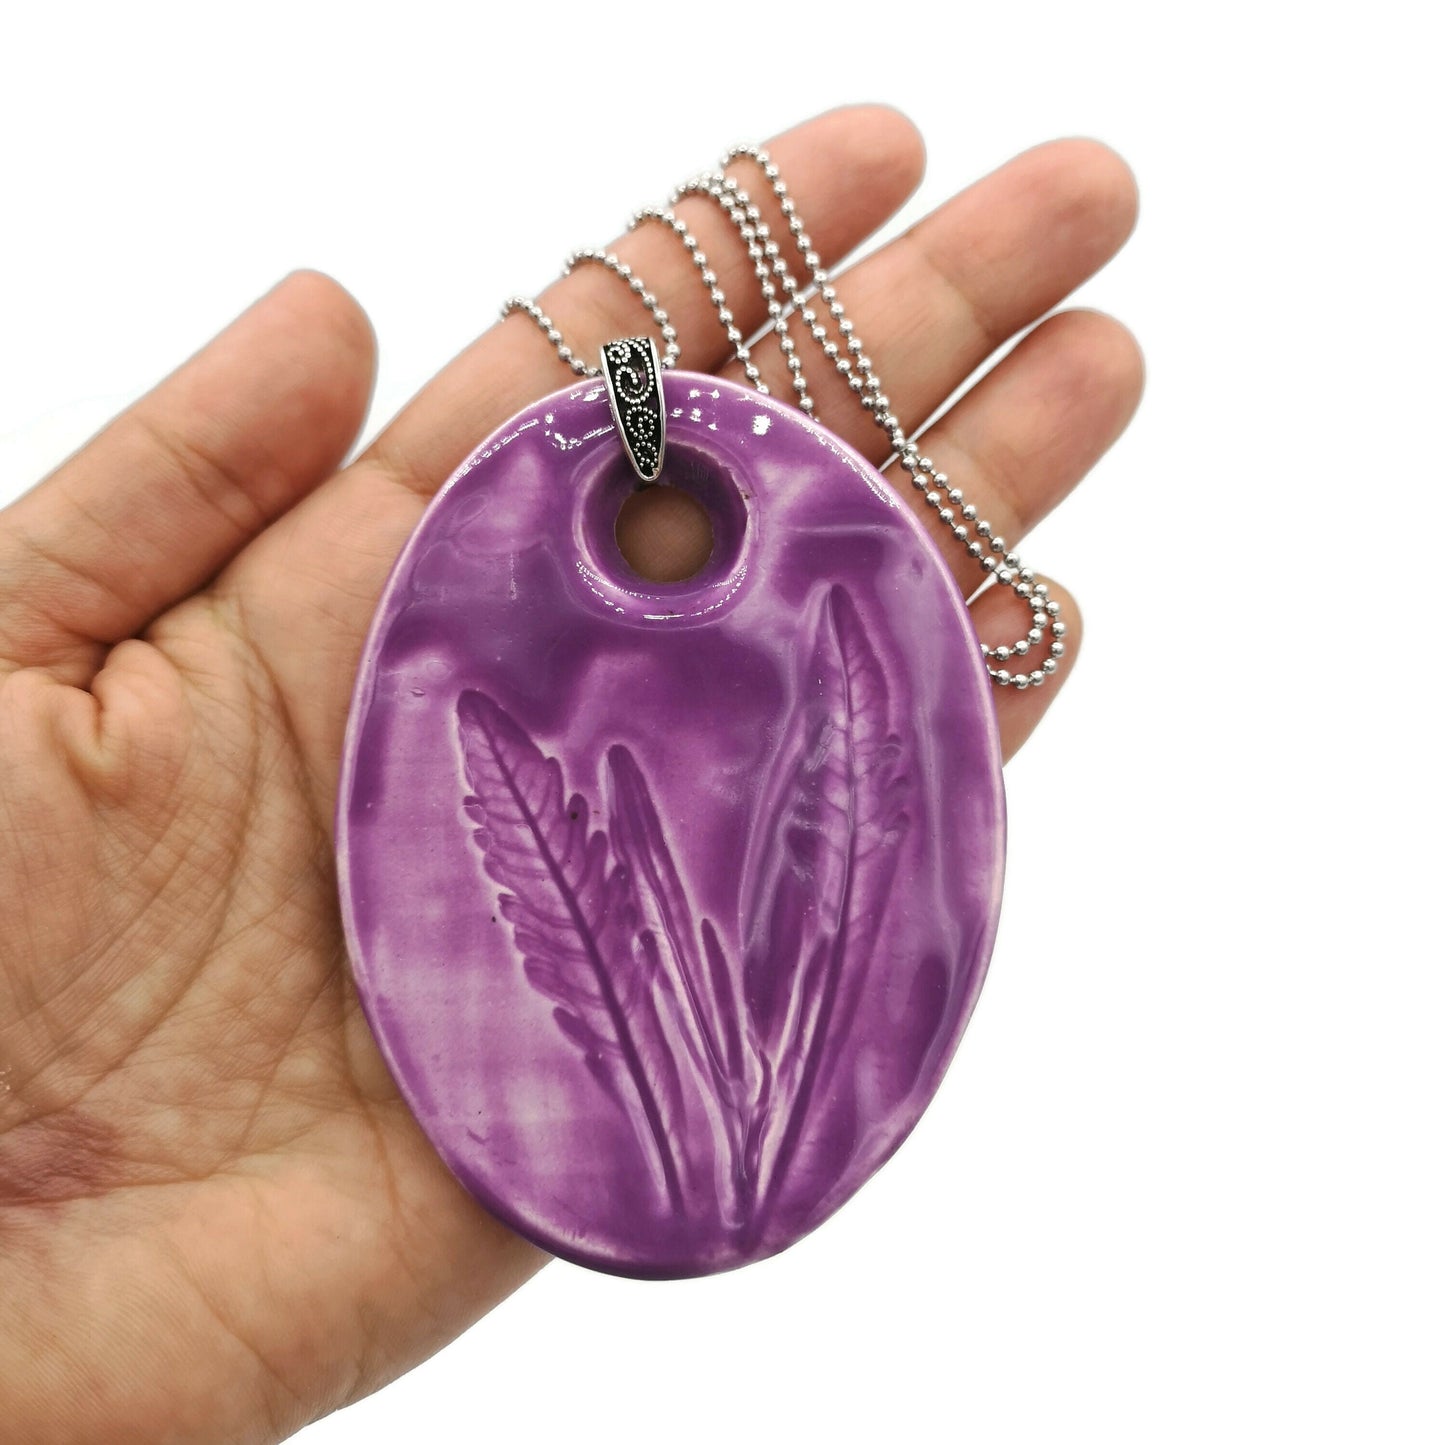 Statement Lavender Pendant Necklace For Women, Boho Leaf Necklace For Her, Bohemian Mom Birthday Gift, Custom Wedding Necklace Lilac Plant - Ceramica Ana Rafael